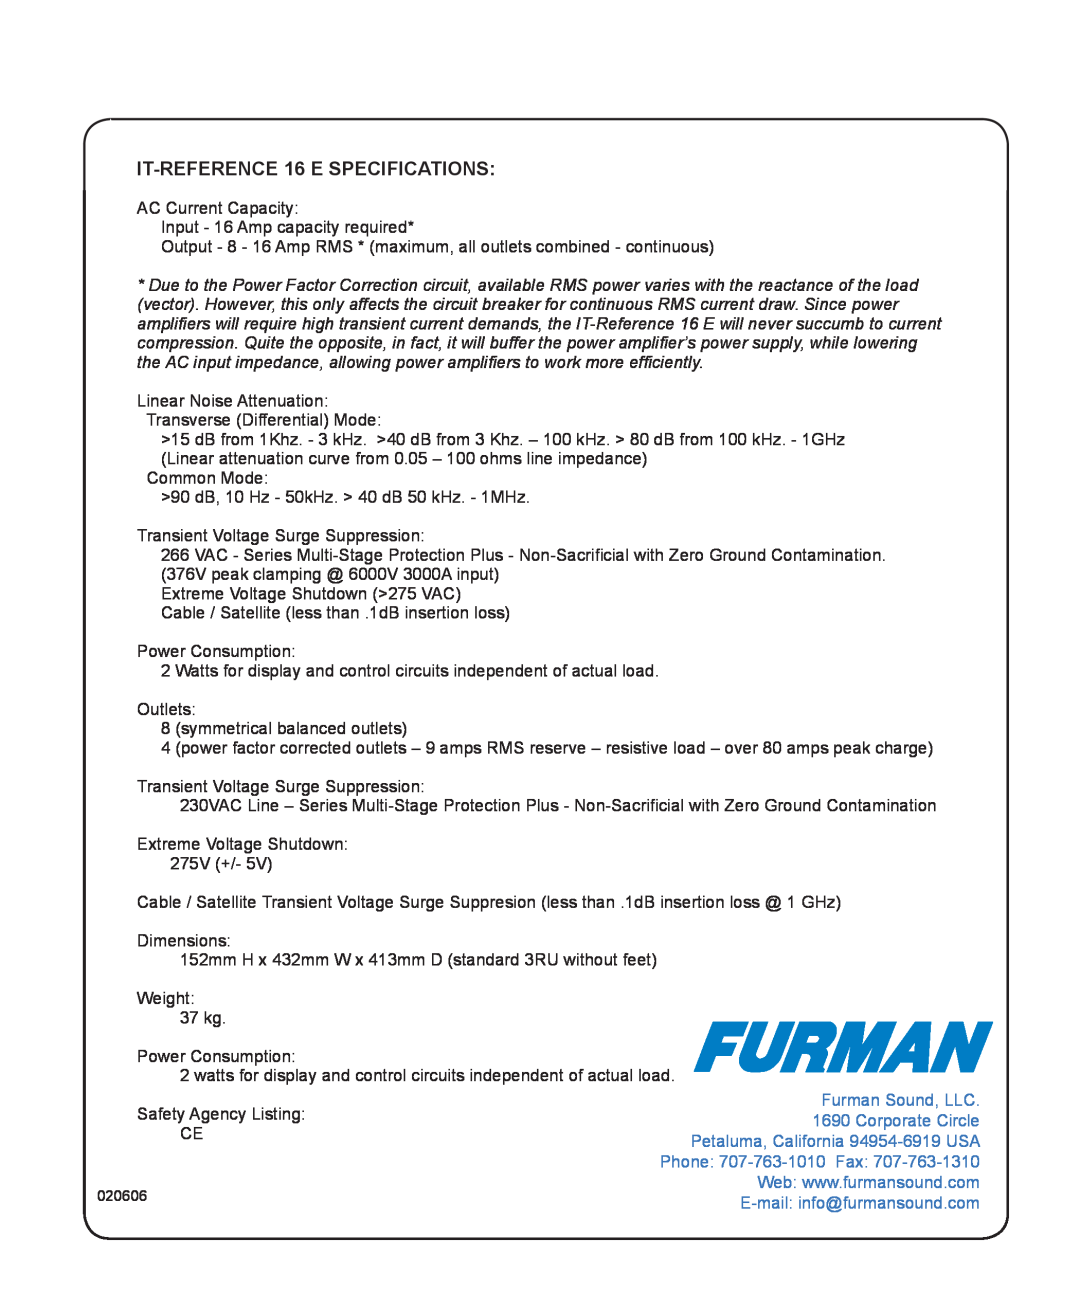 Furman Sound owner manual IT-REFERENCE 16 E owner’s manual, IT-REFERENCE 16 E SPECIFICATIONS, Safety Agency Listing 